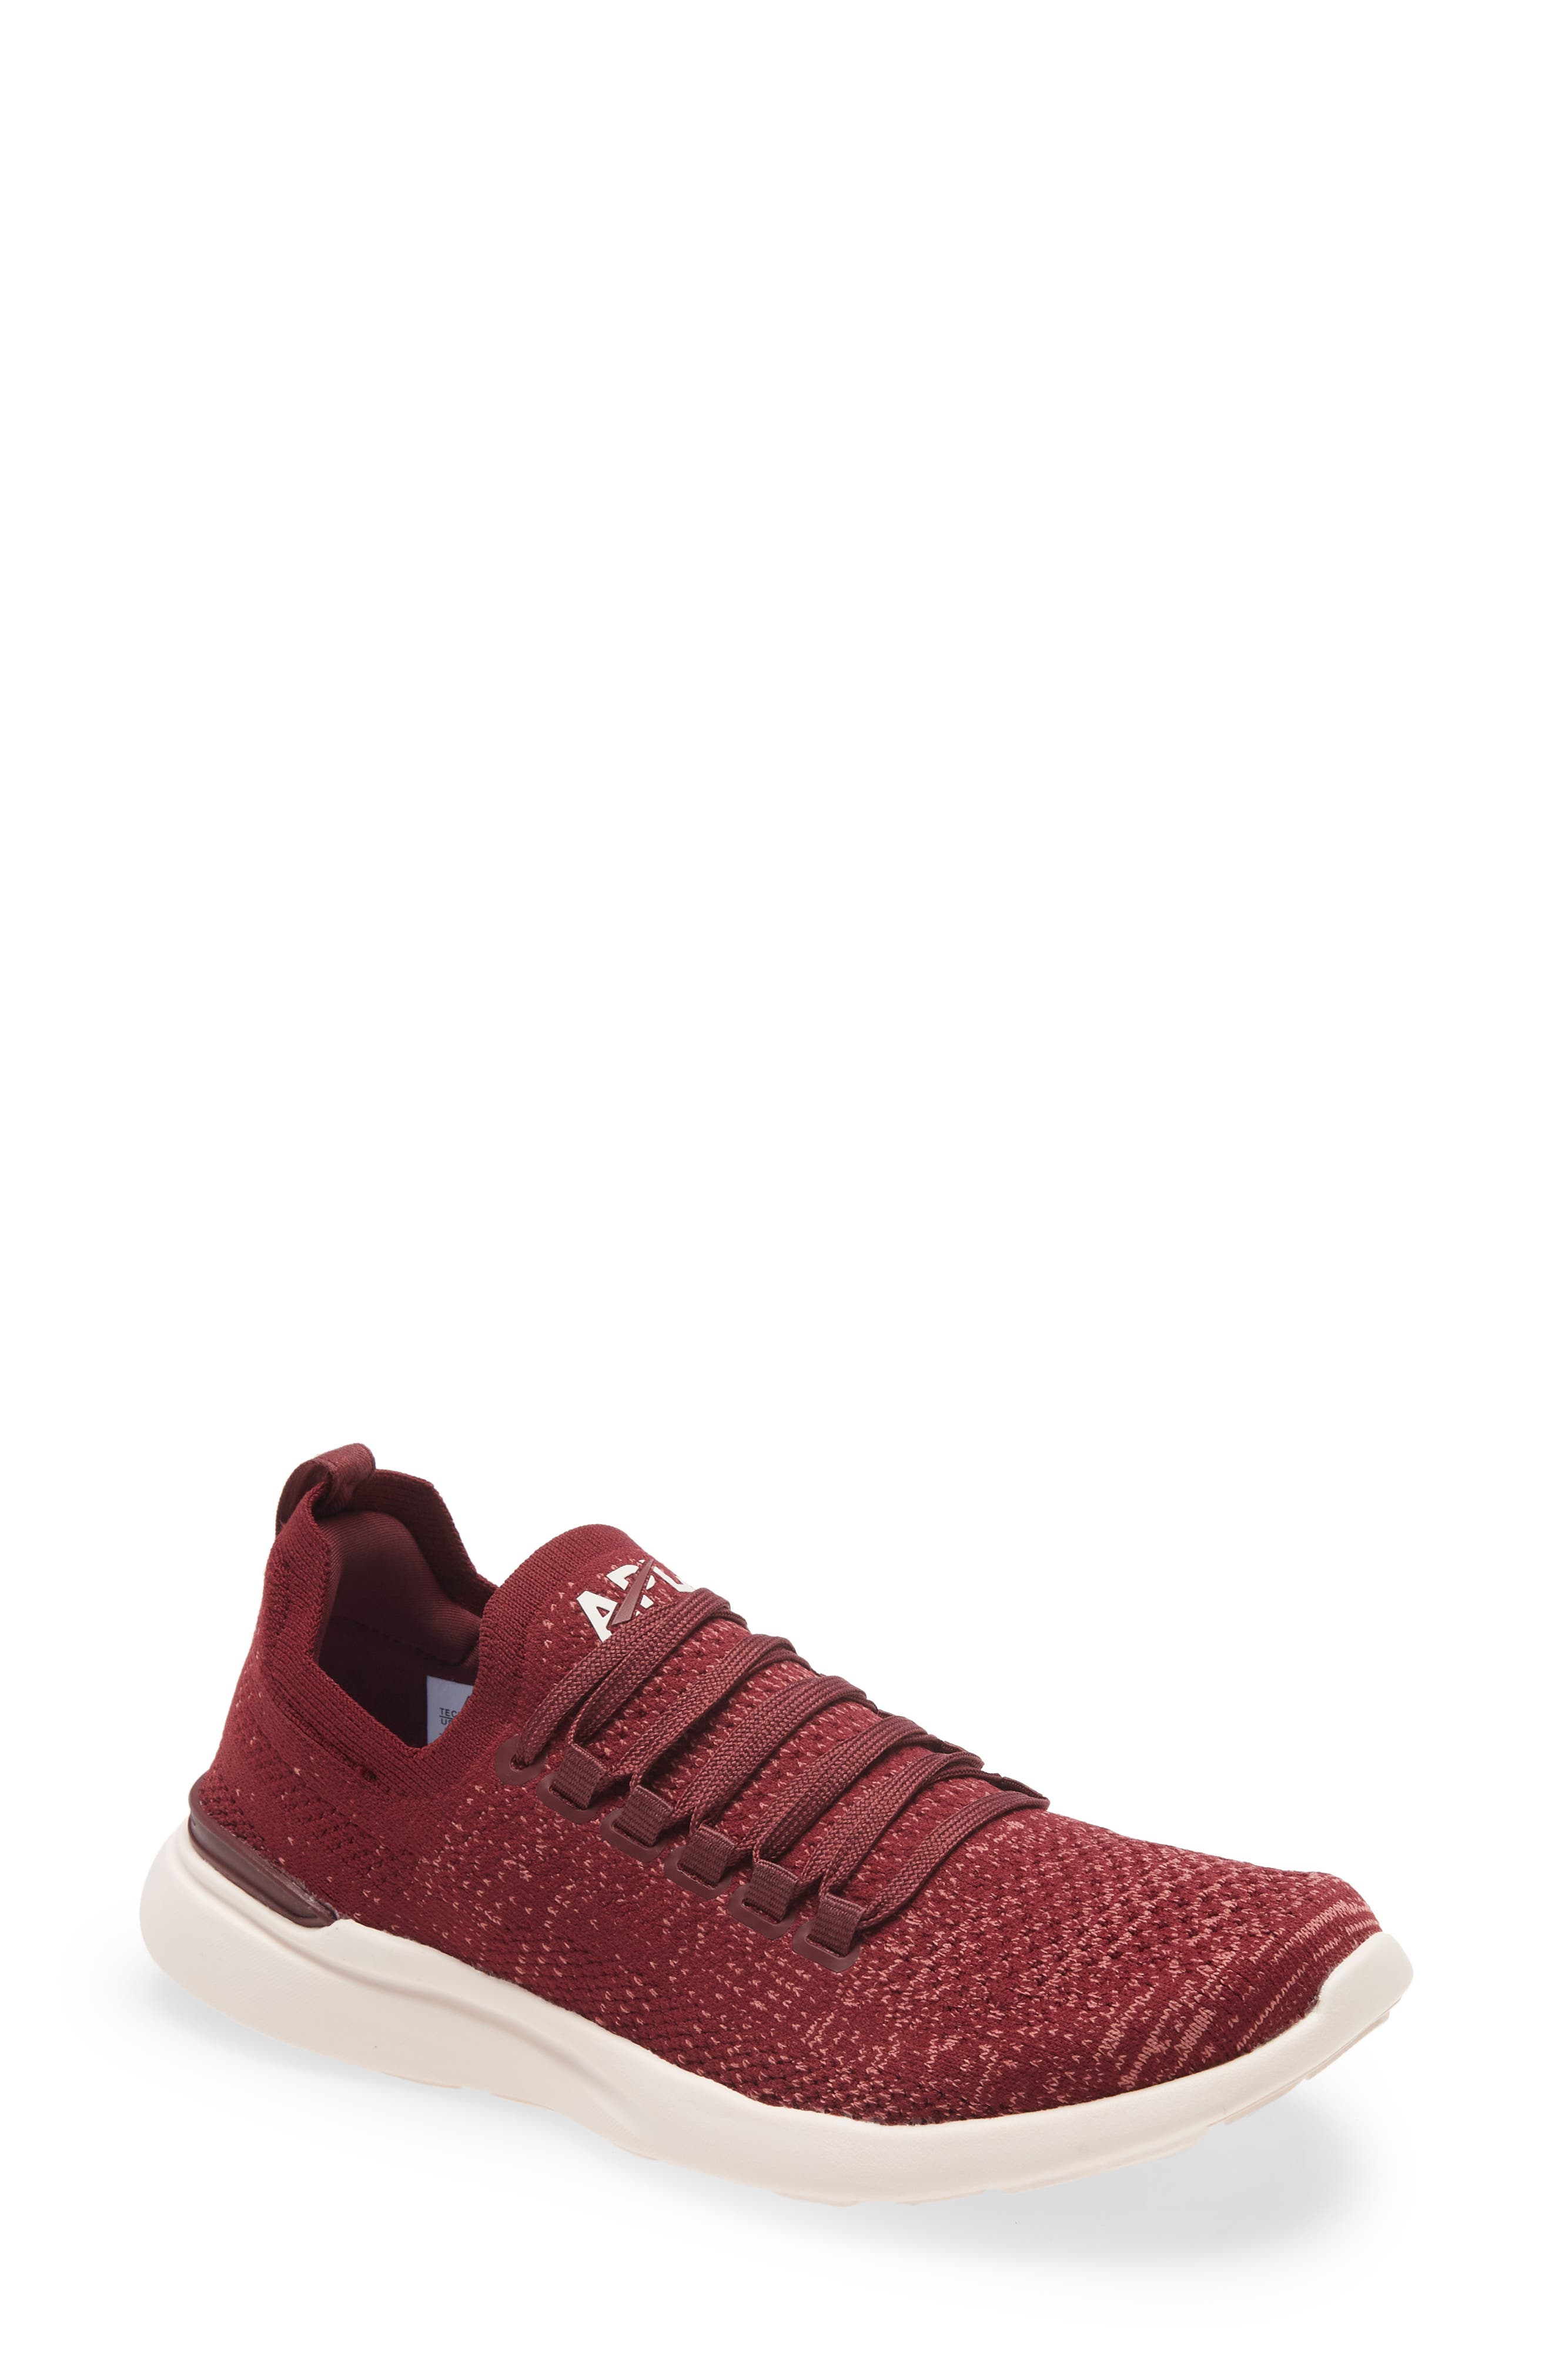 Women's Red Sneakers \u0026 Athletic Shoes 